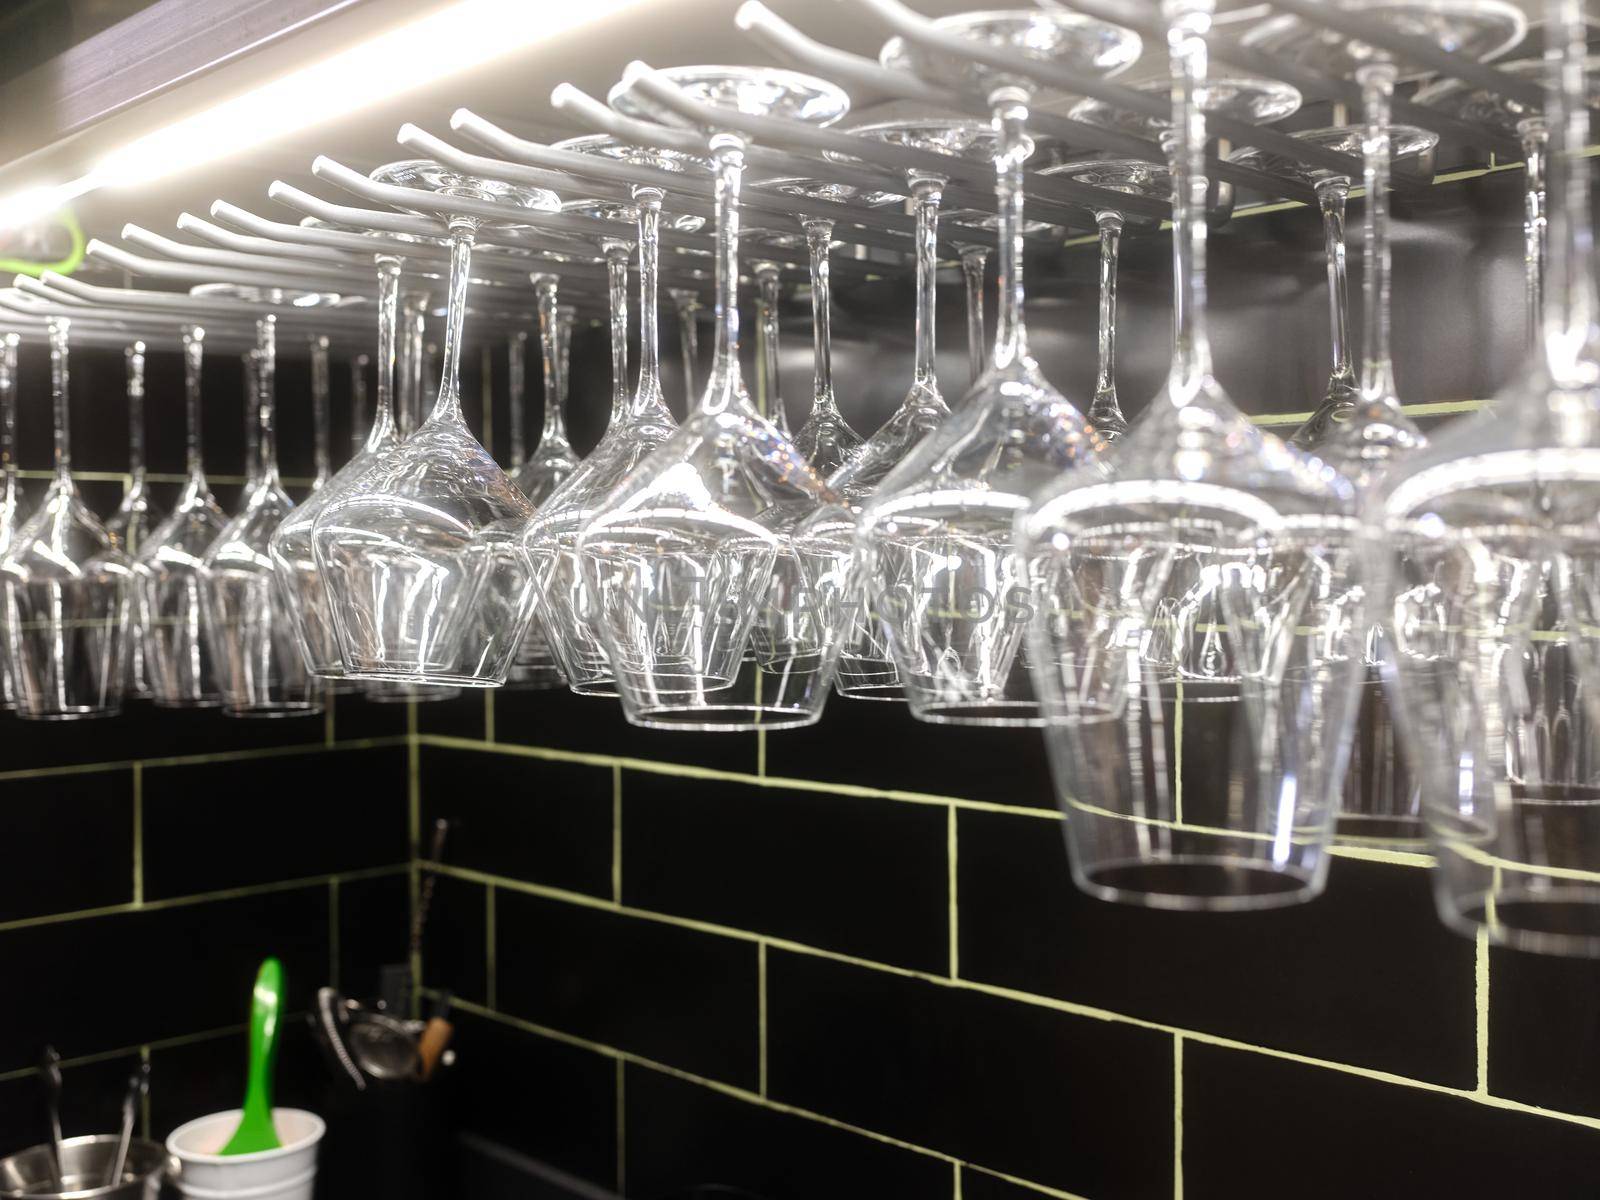 Wine glasses hanging from a rack in a restaurant by WesternExoticStockers